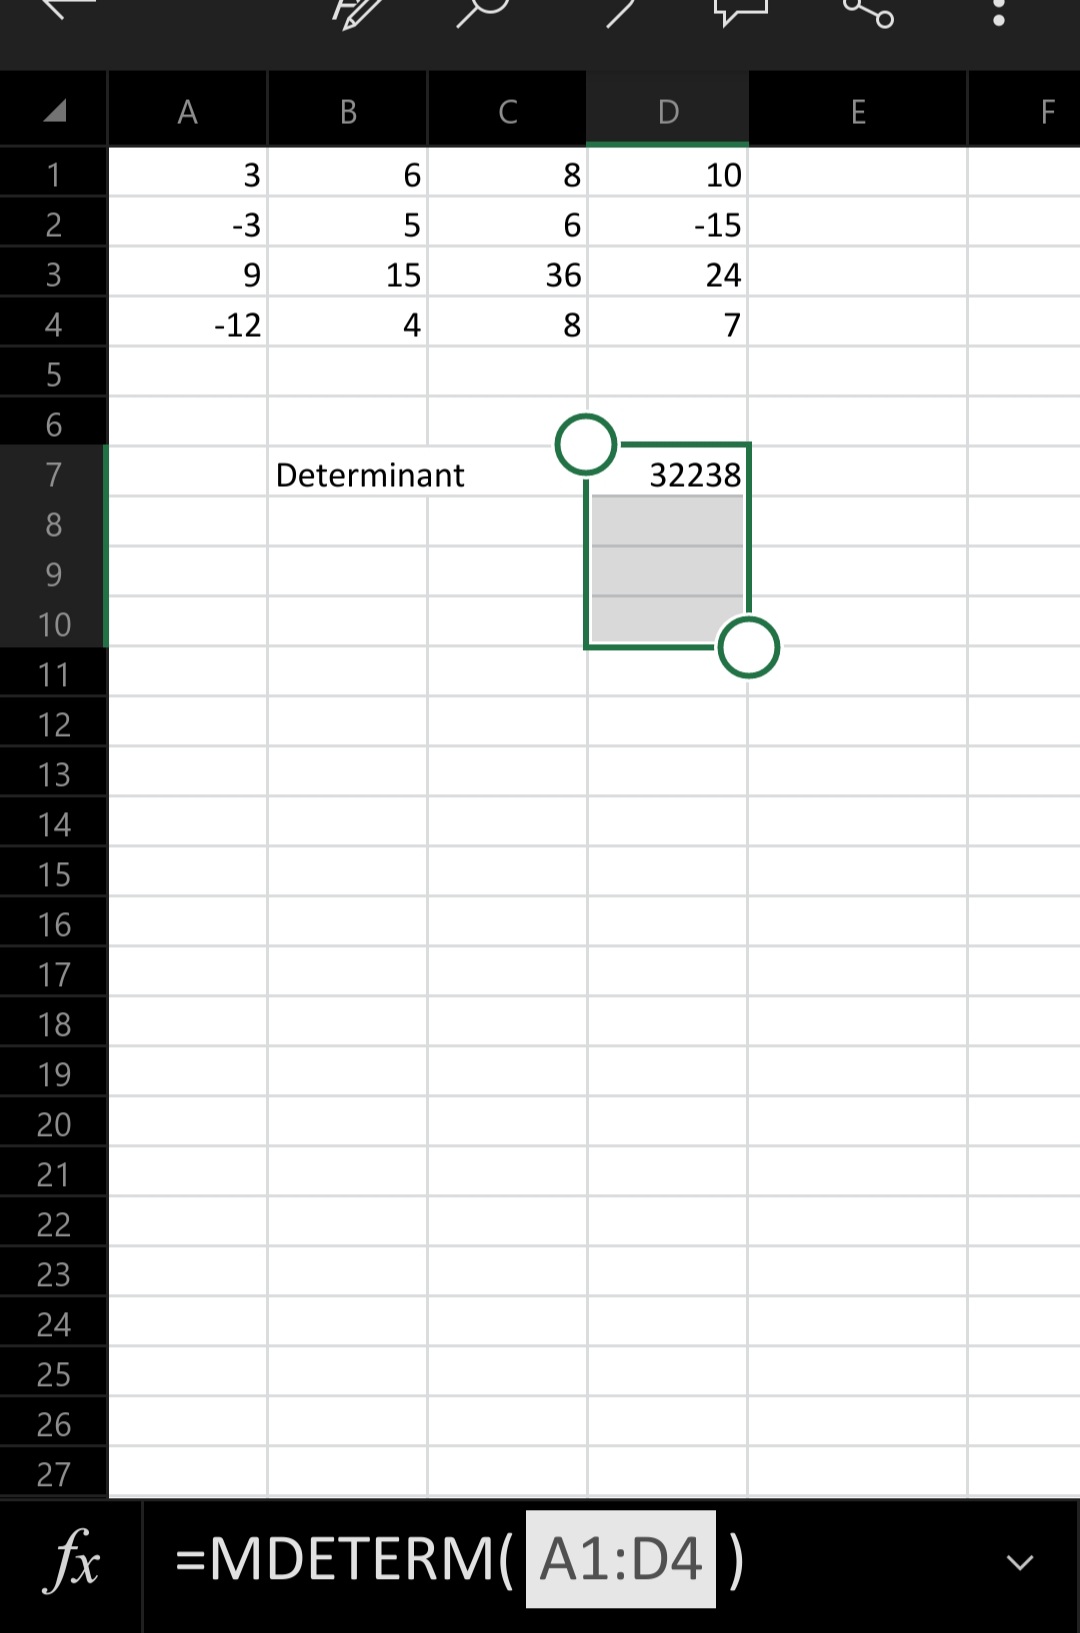 how to use the MDETERM function in Excel. Suppose you have a 4x4 matrix stored in A1 to C3 cells. To find the determinant, you can simply use the formula